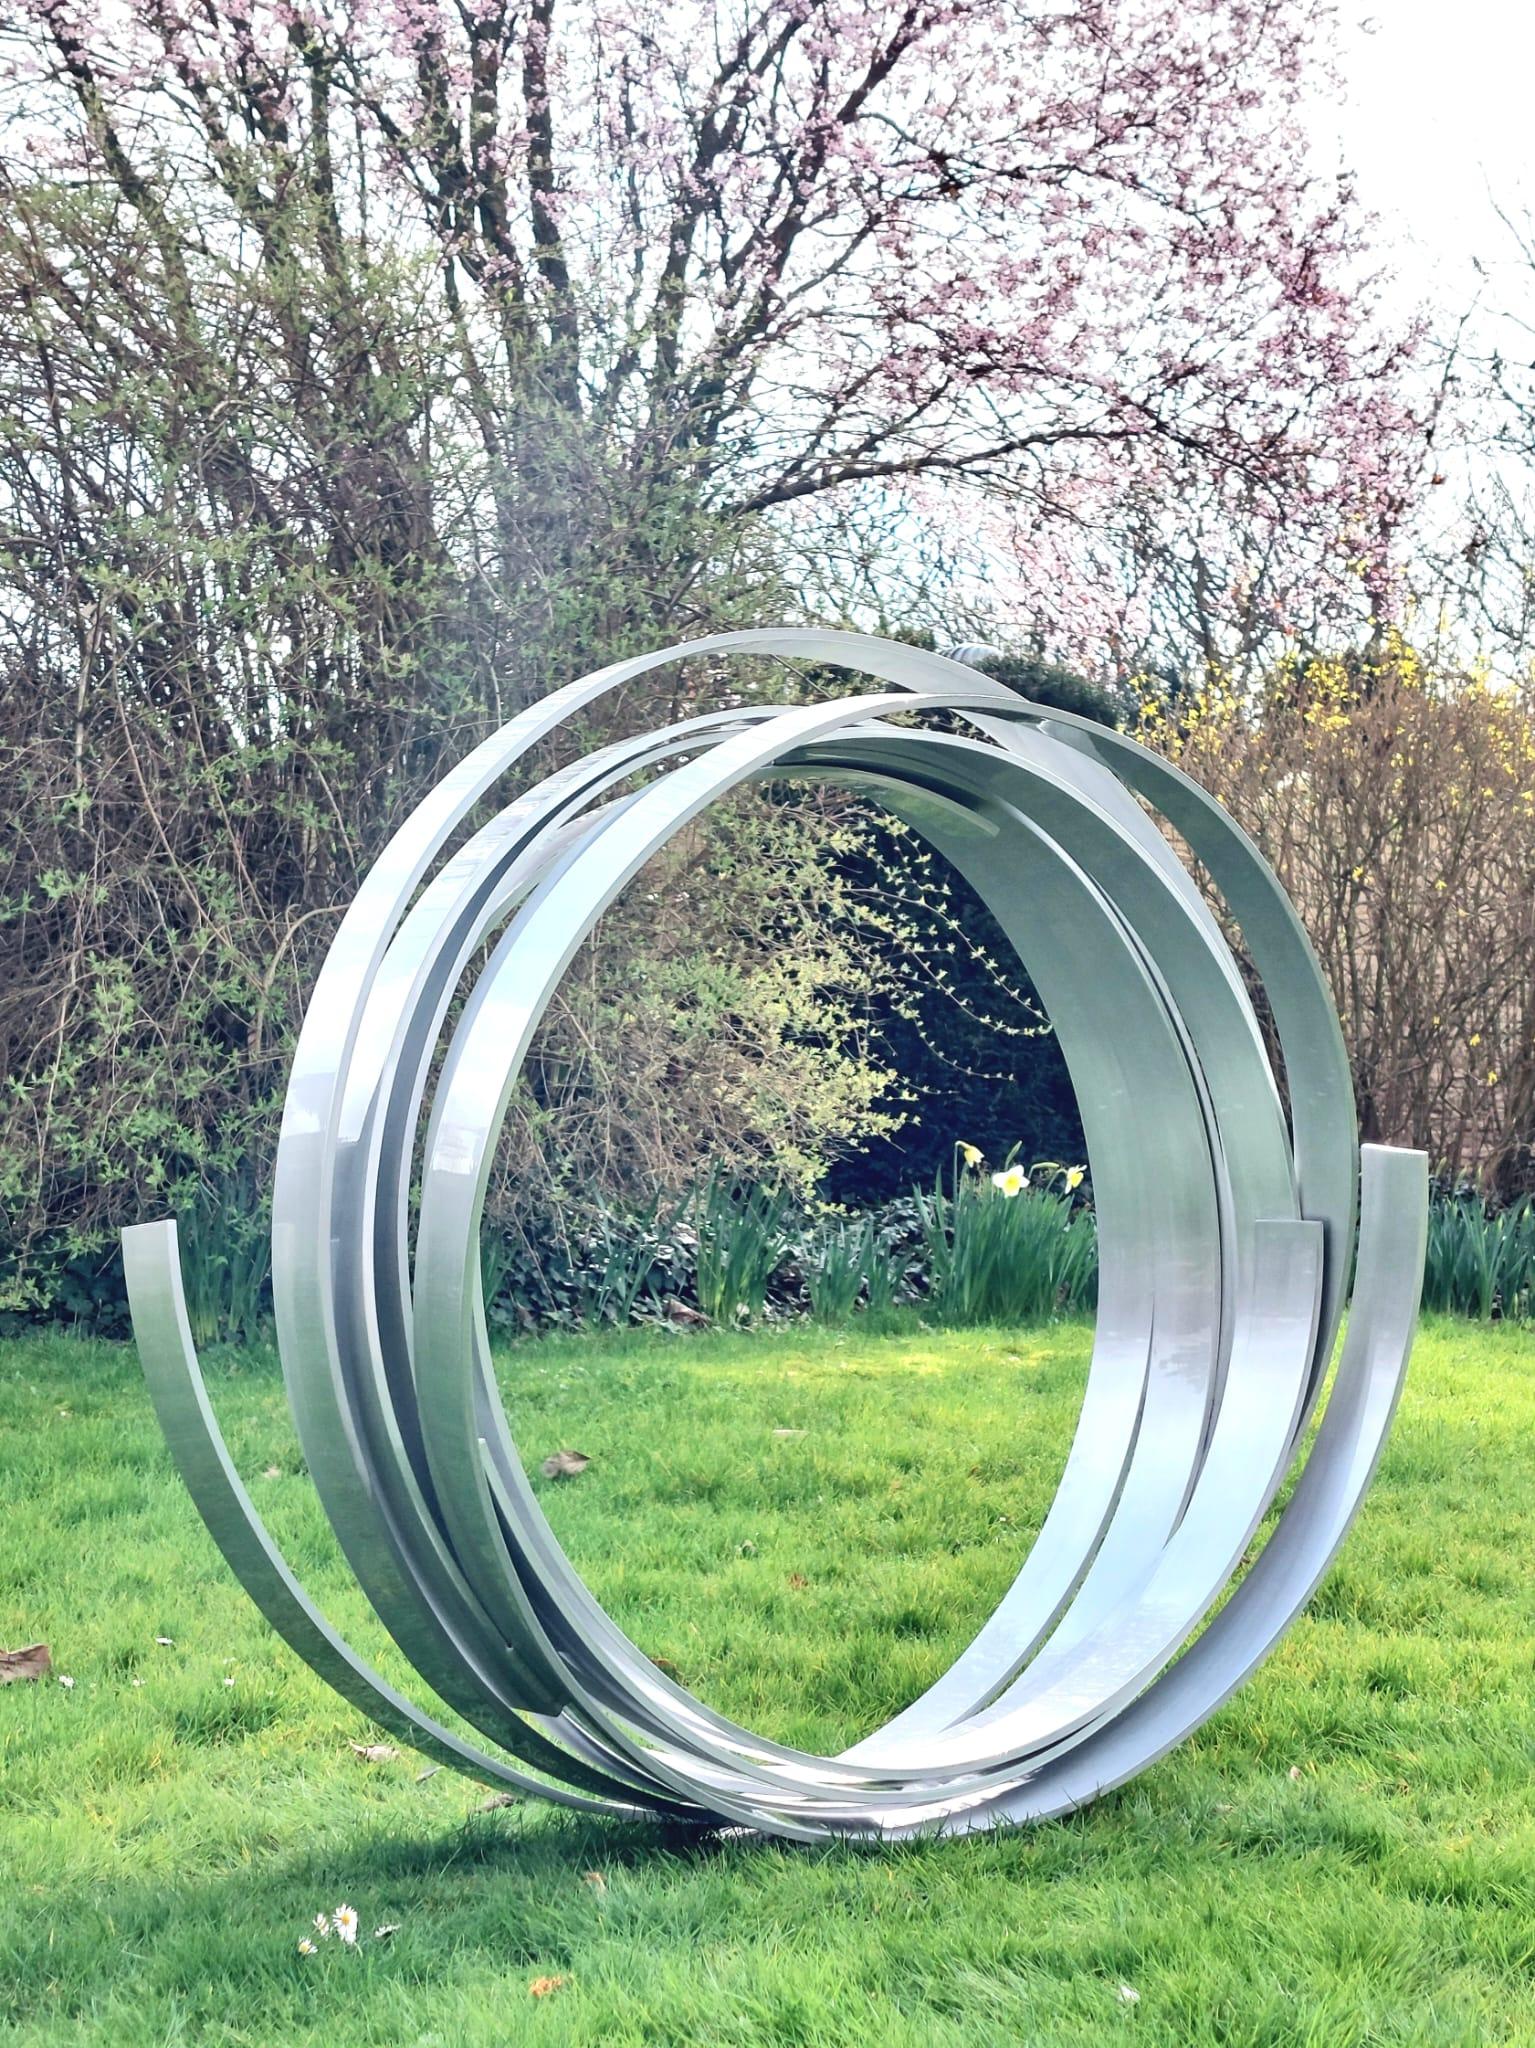 Kuno Vollet Abstract Sculpture - Timeless Orbit - Silver Contemporary Aluminum sculpture for Outdoors